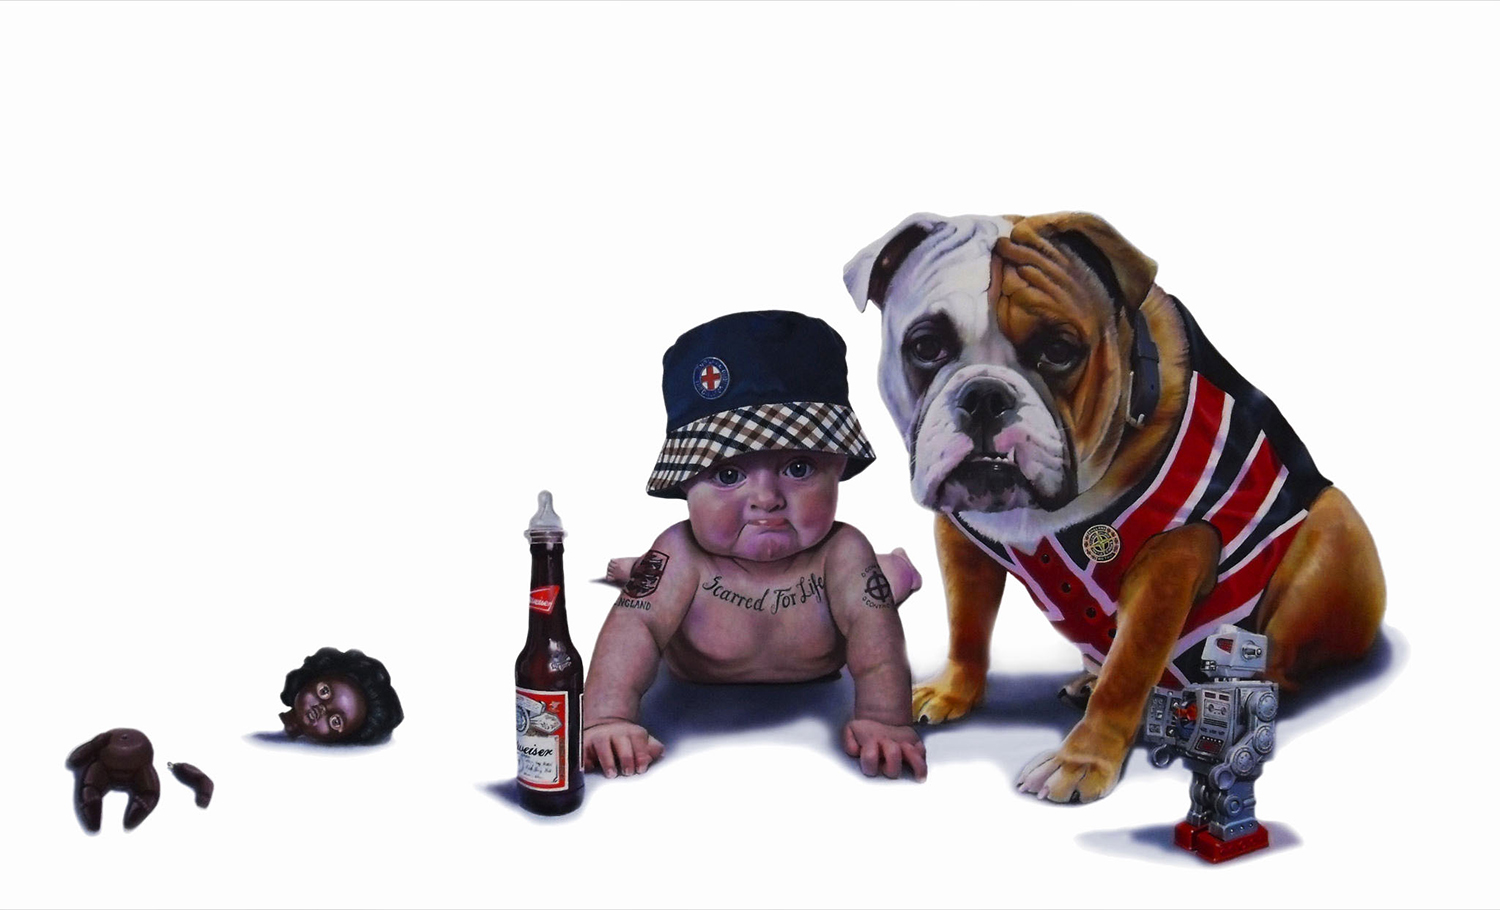 A baby with a beer and bulldog - Tony South - 2 Dolls Heads And A Bulldog